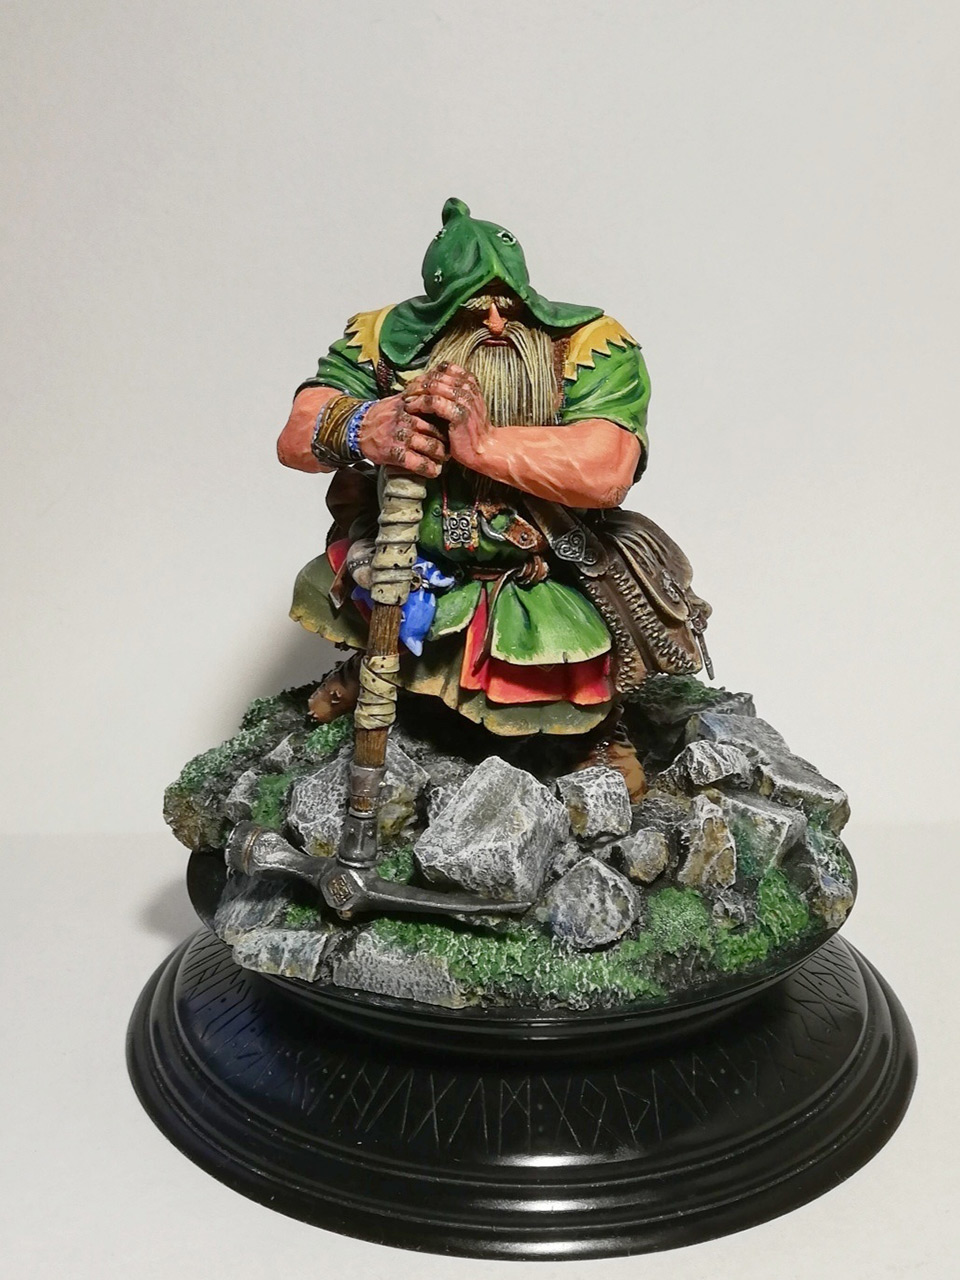 Miscellaneous: Dwarf the Grave Robber, photo #1